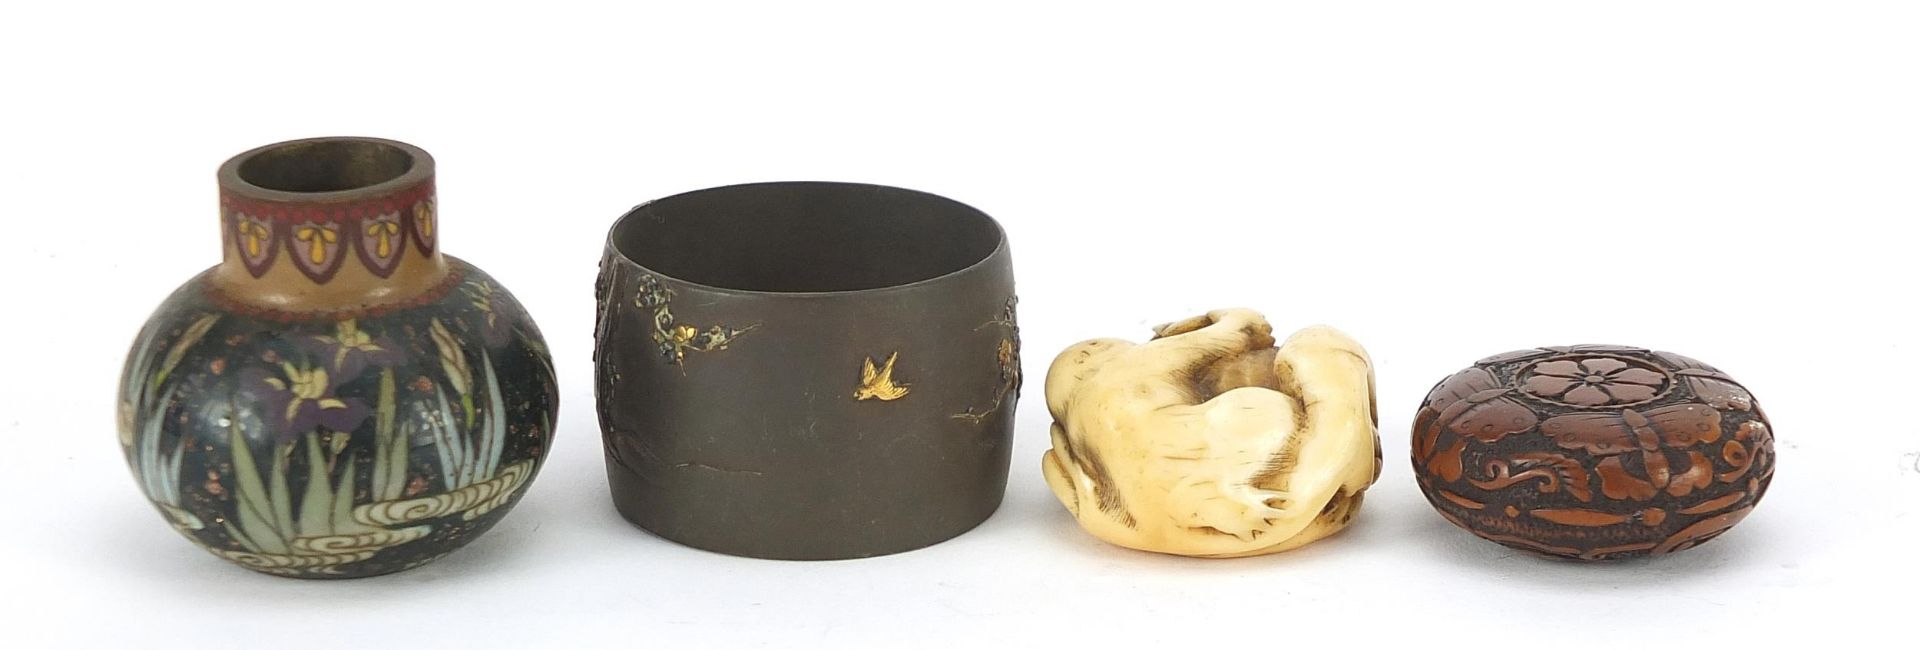 Japanese objects including an ivory toggle, mixed metal napkin ring and cloisonne vase, the - Bild 2 aus 6